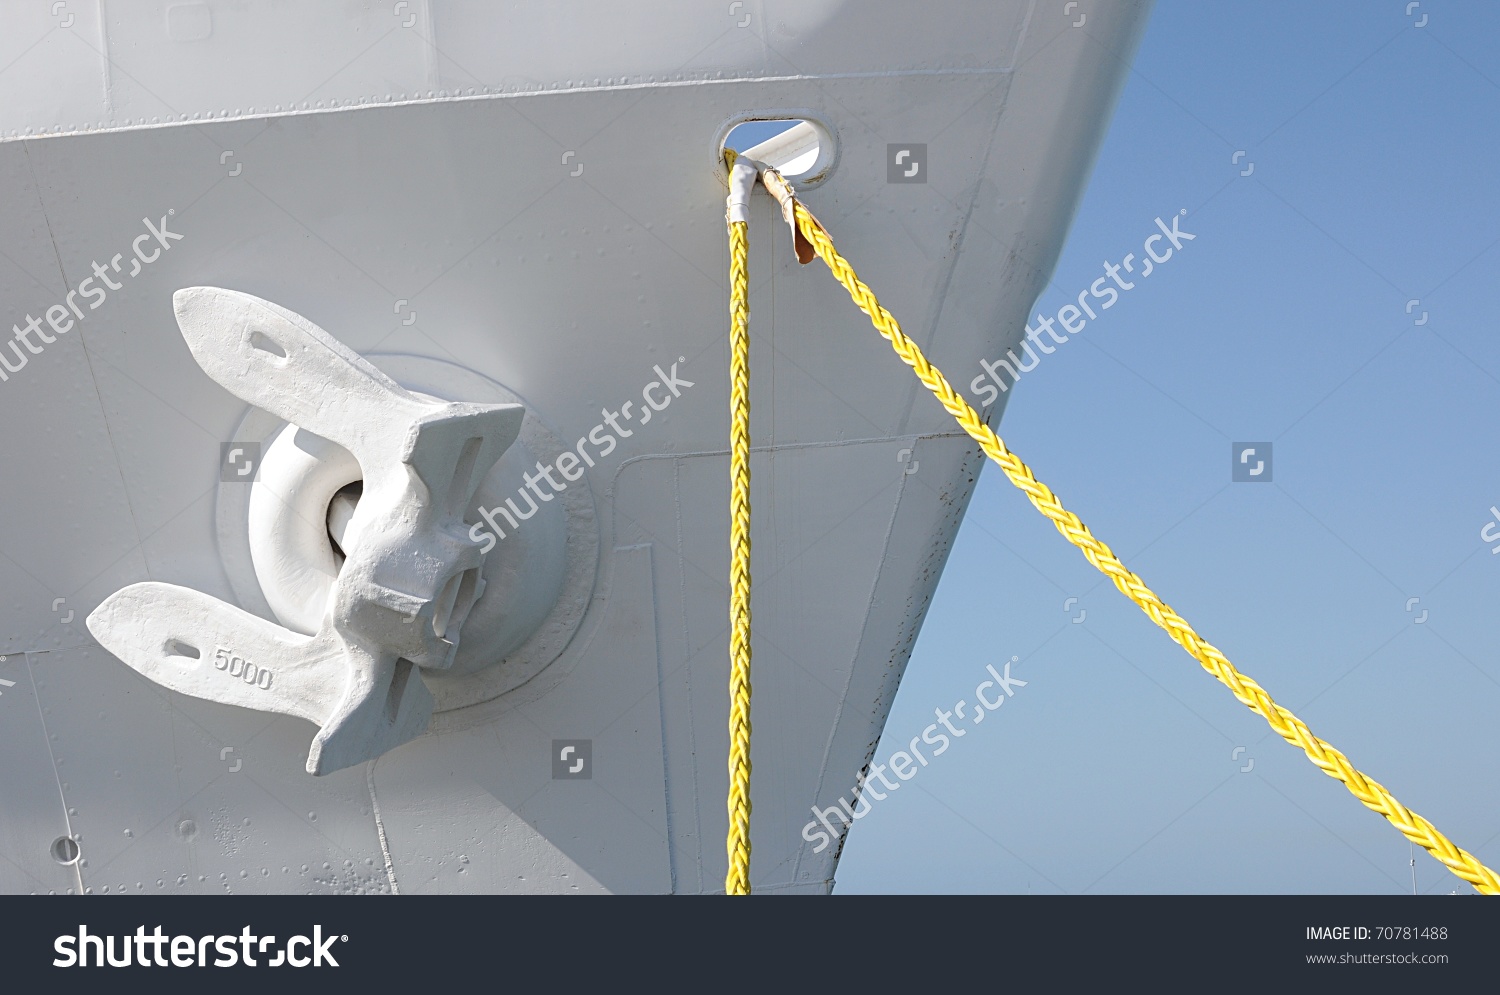 Anchor And Mooring Lines On Large Ship Stock Photo 70781488.